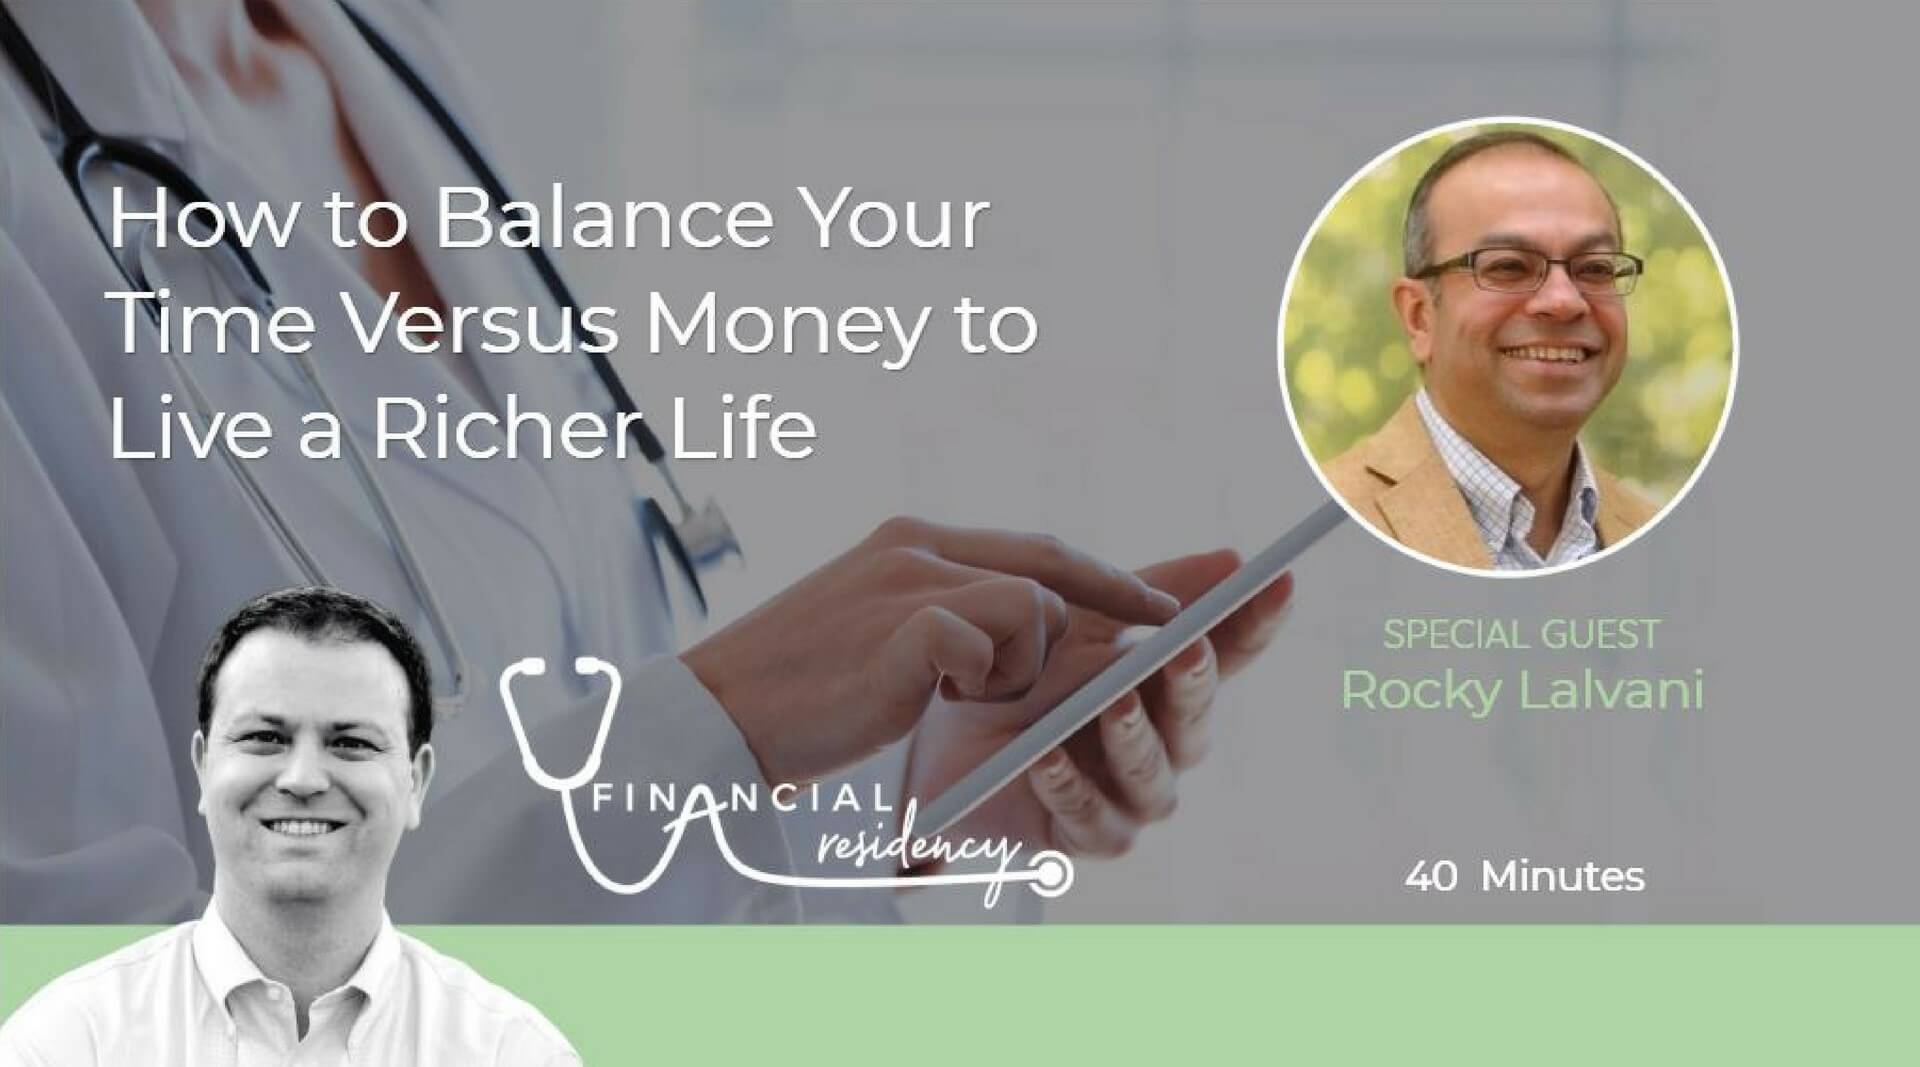 Rocky Lalvani discusses spending time versus money to increase your quality of life